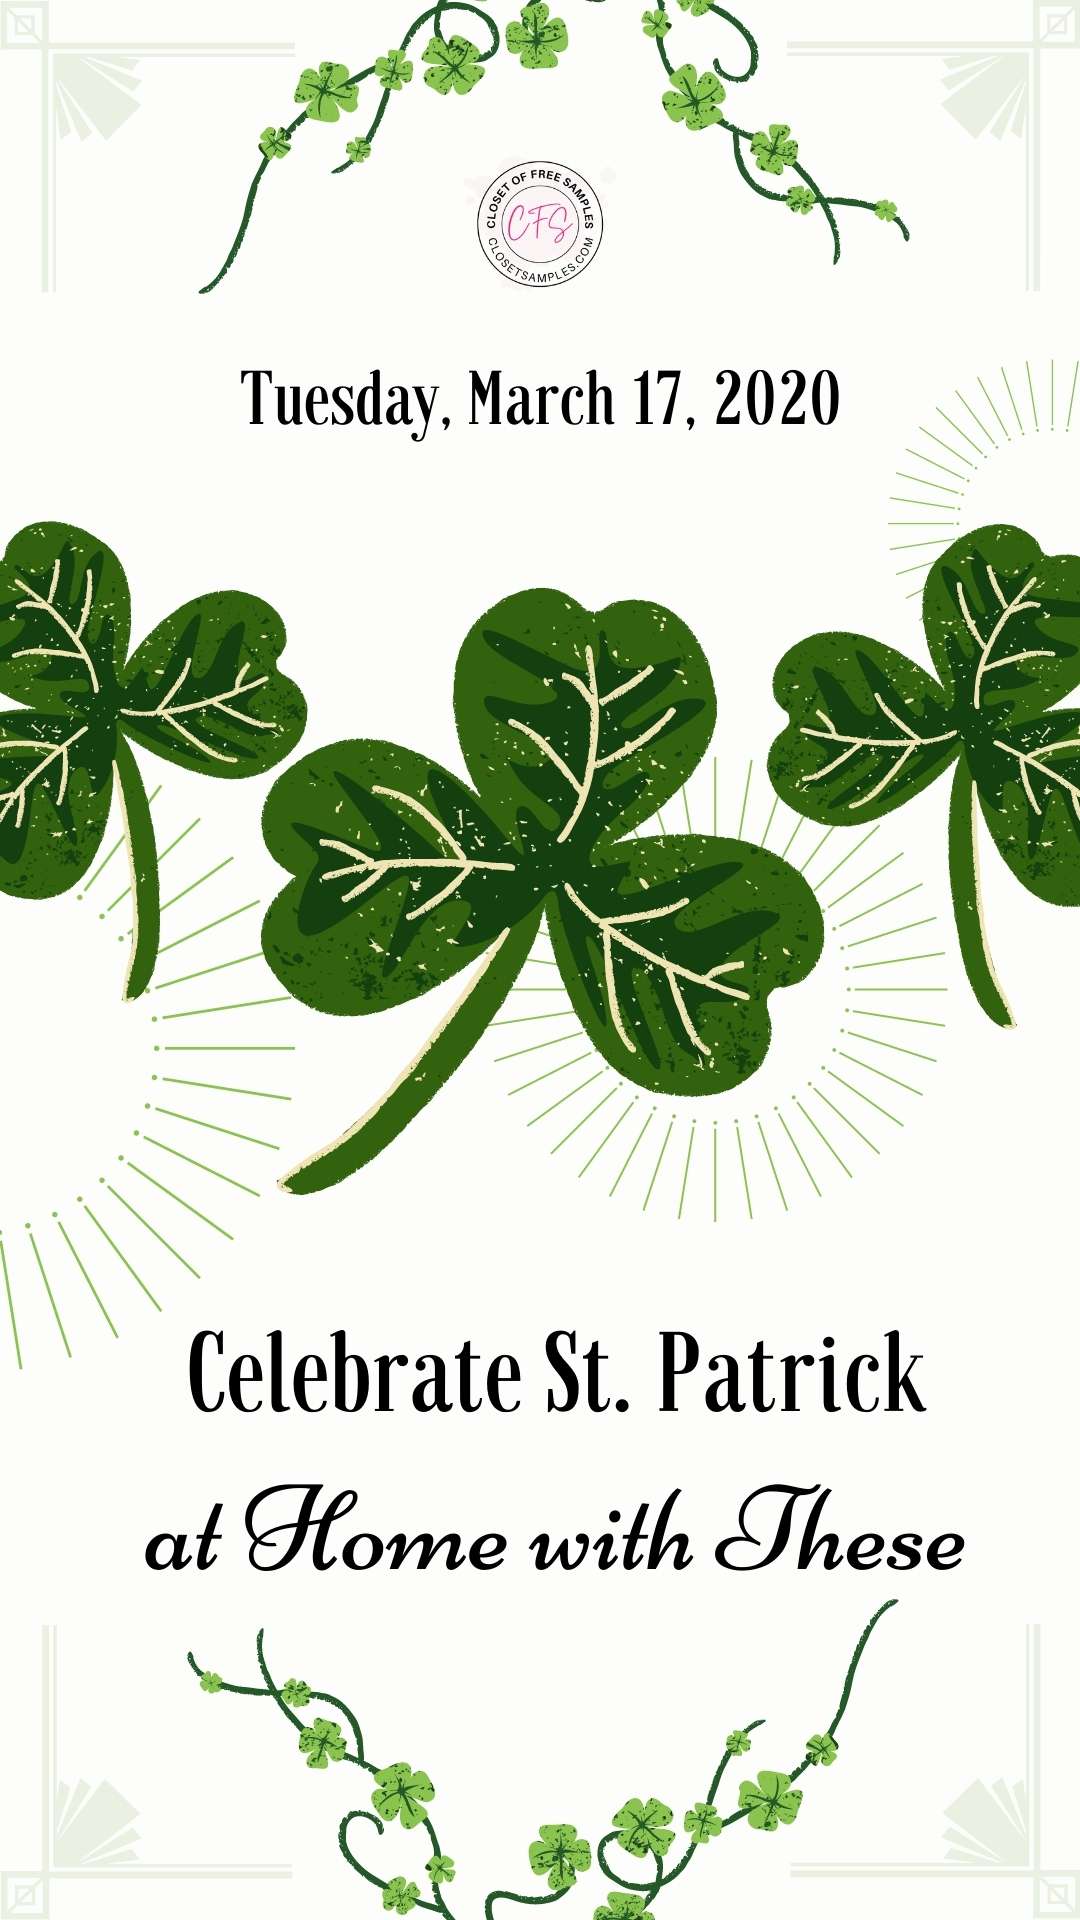 Celebrate Saint Patricks Day at Home with These closetsamples Pinterest